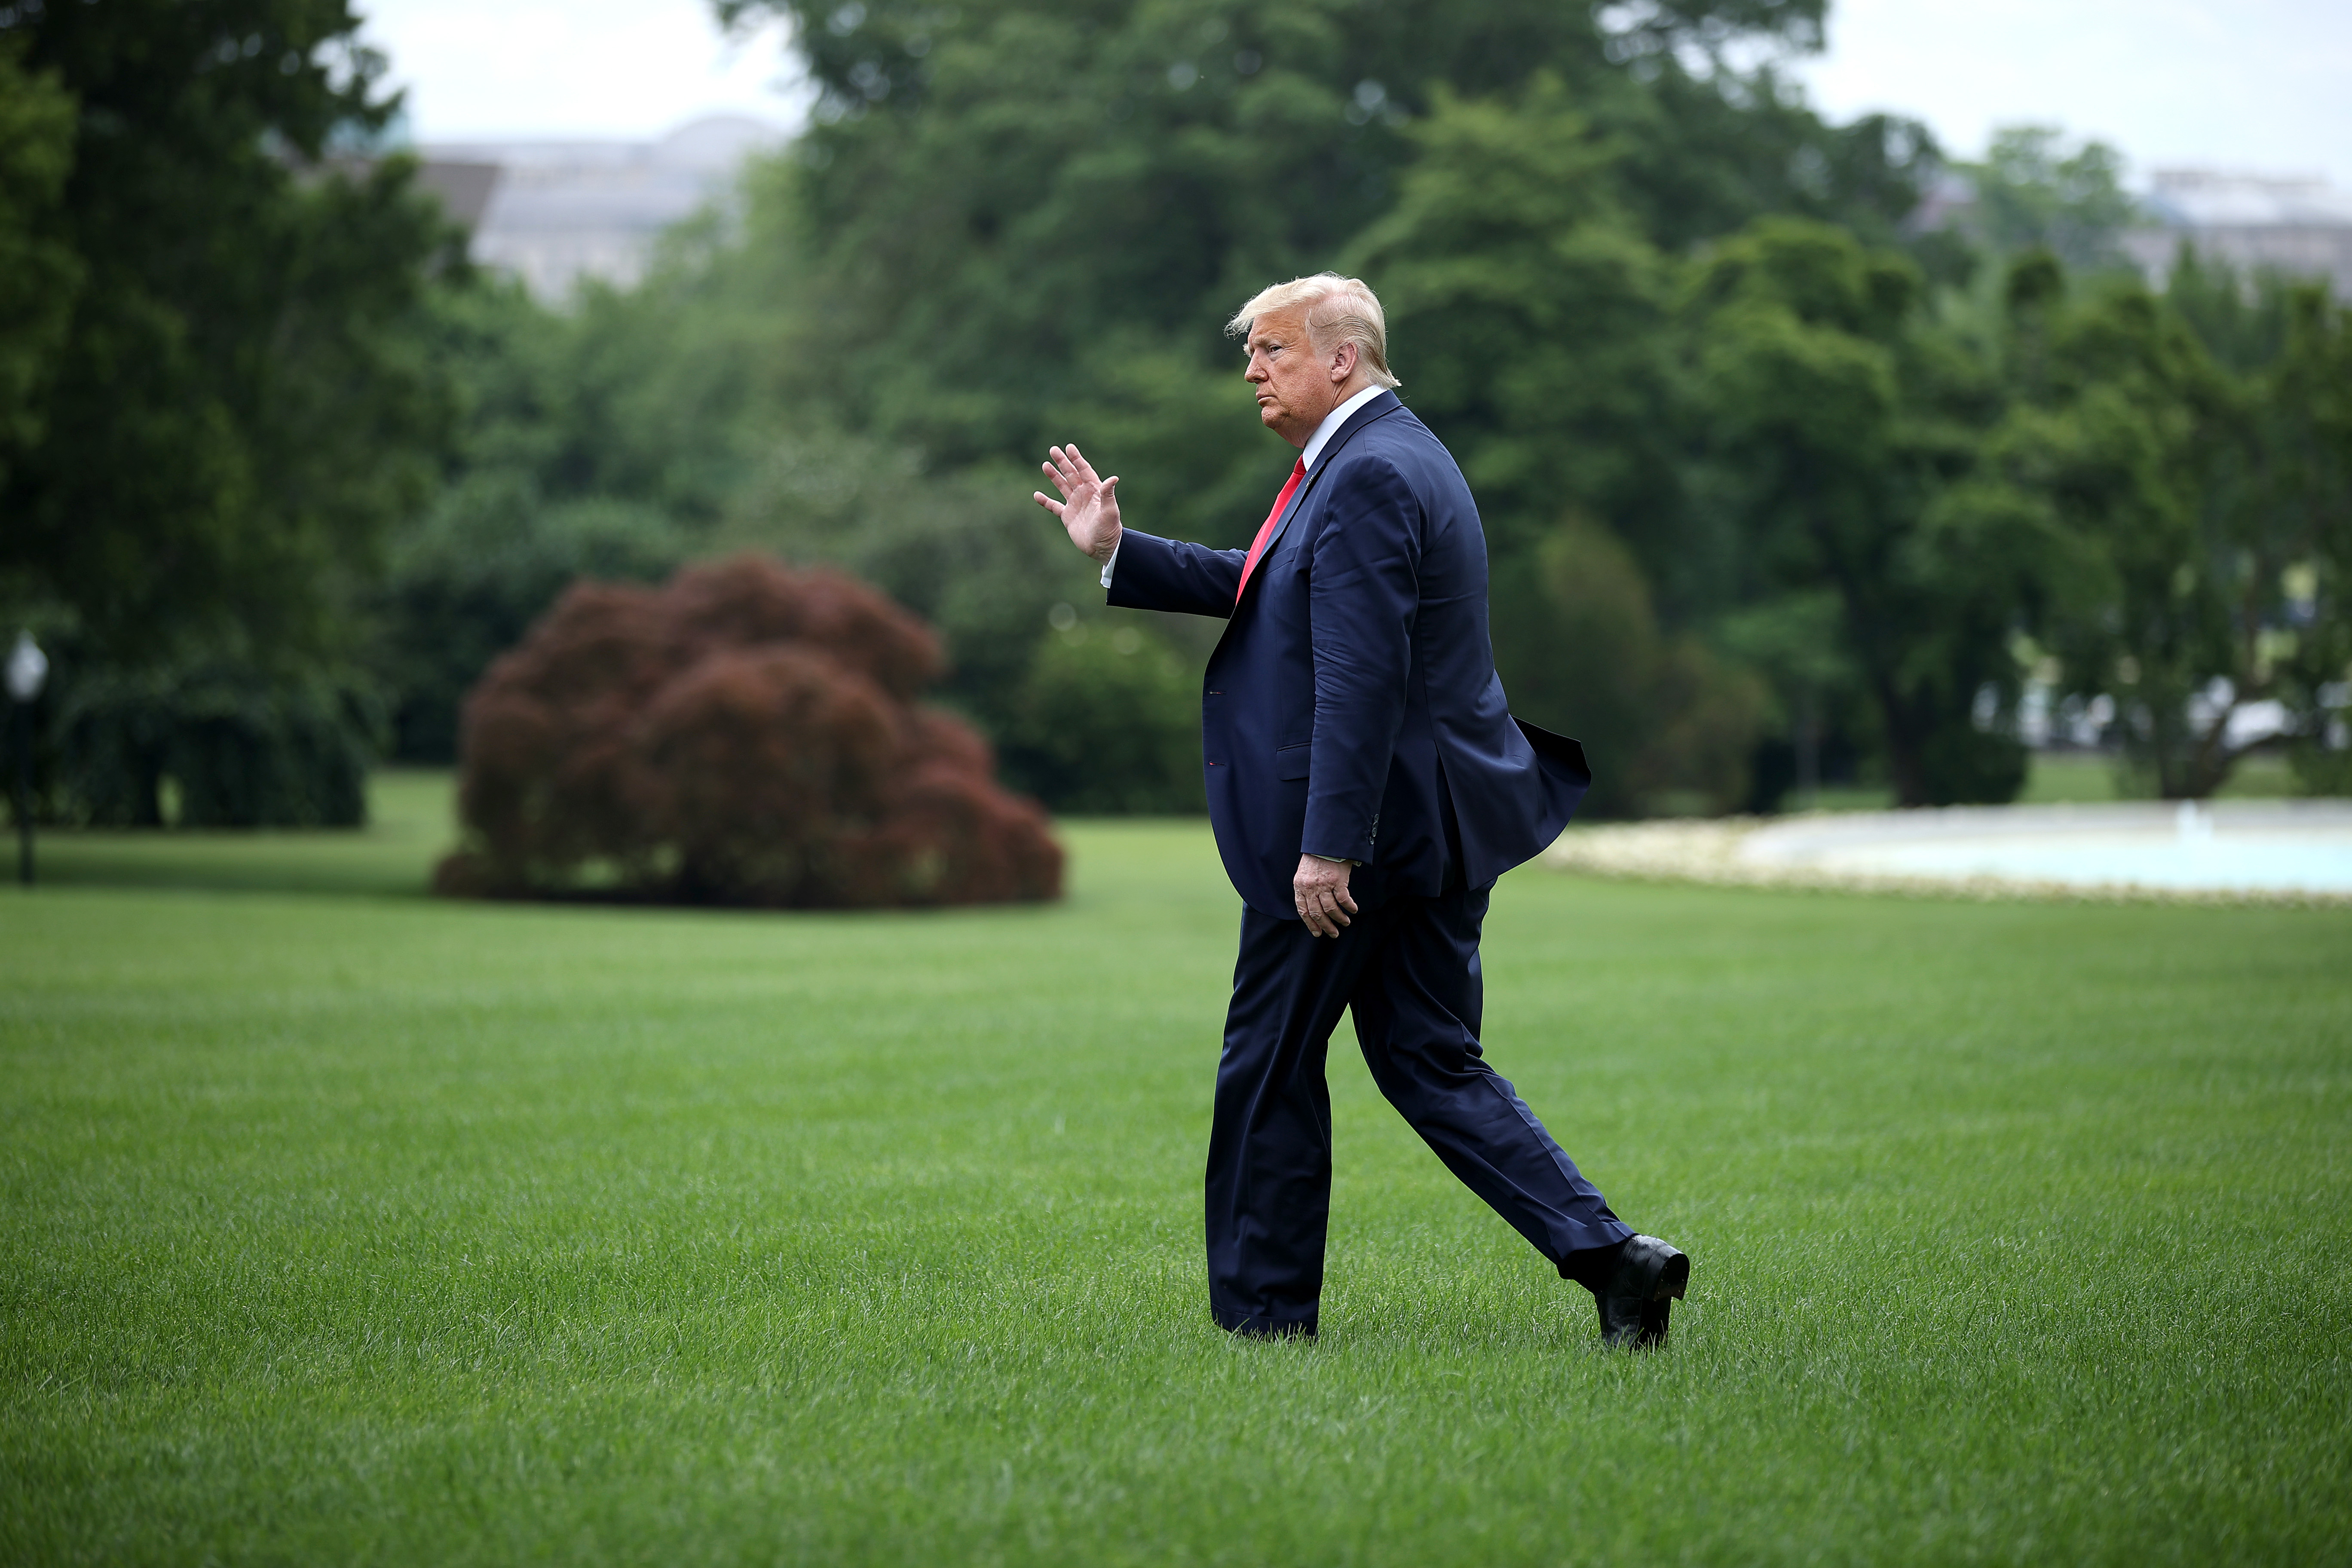 WASHINGTON, DC - JUNE 05: U.S. President Donald Trump walks across the South Lawn before boarding Marine One and departing the White House June 05, 2020 in Washington, DC. Trump is traveling to Maine to hold business round table and visit Puritan Medical Products in Guilford. (Photo by Chip Somodevilla/Getty Images)